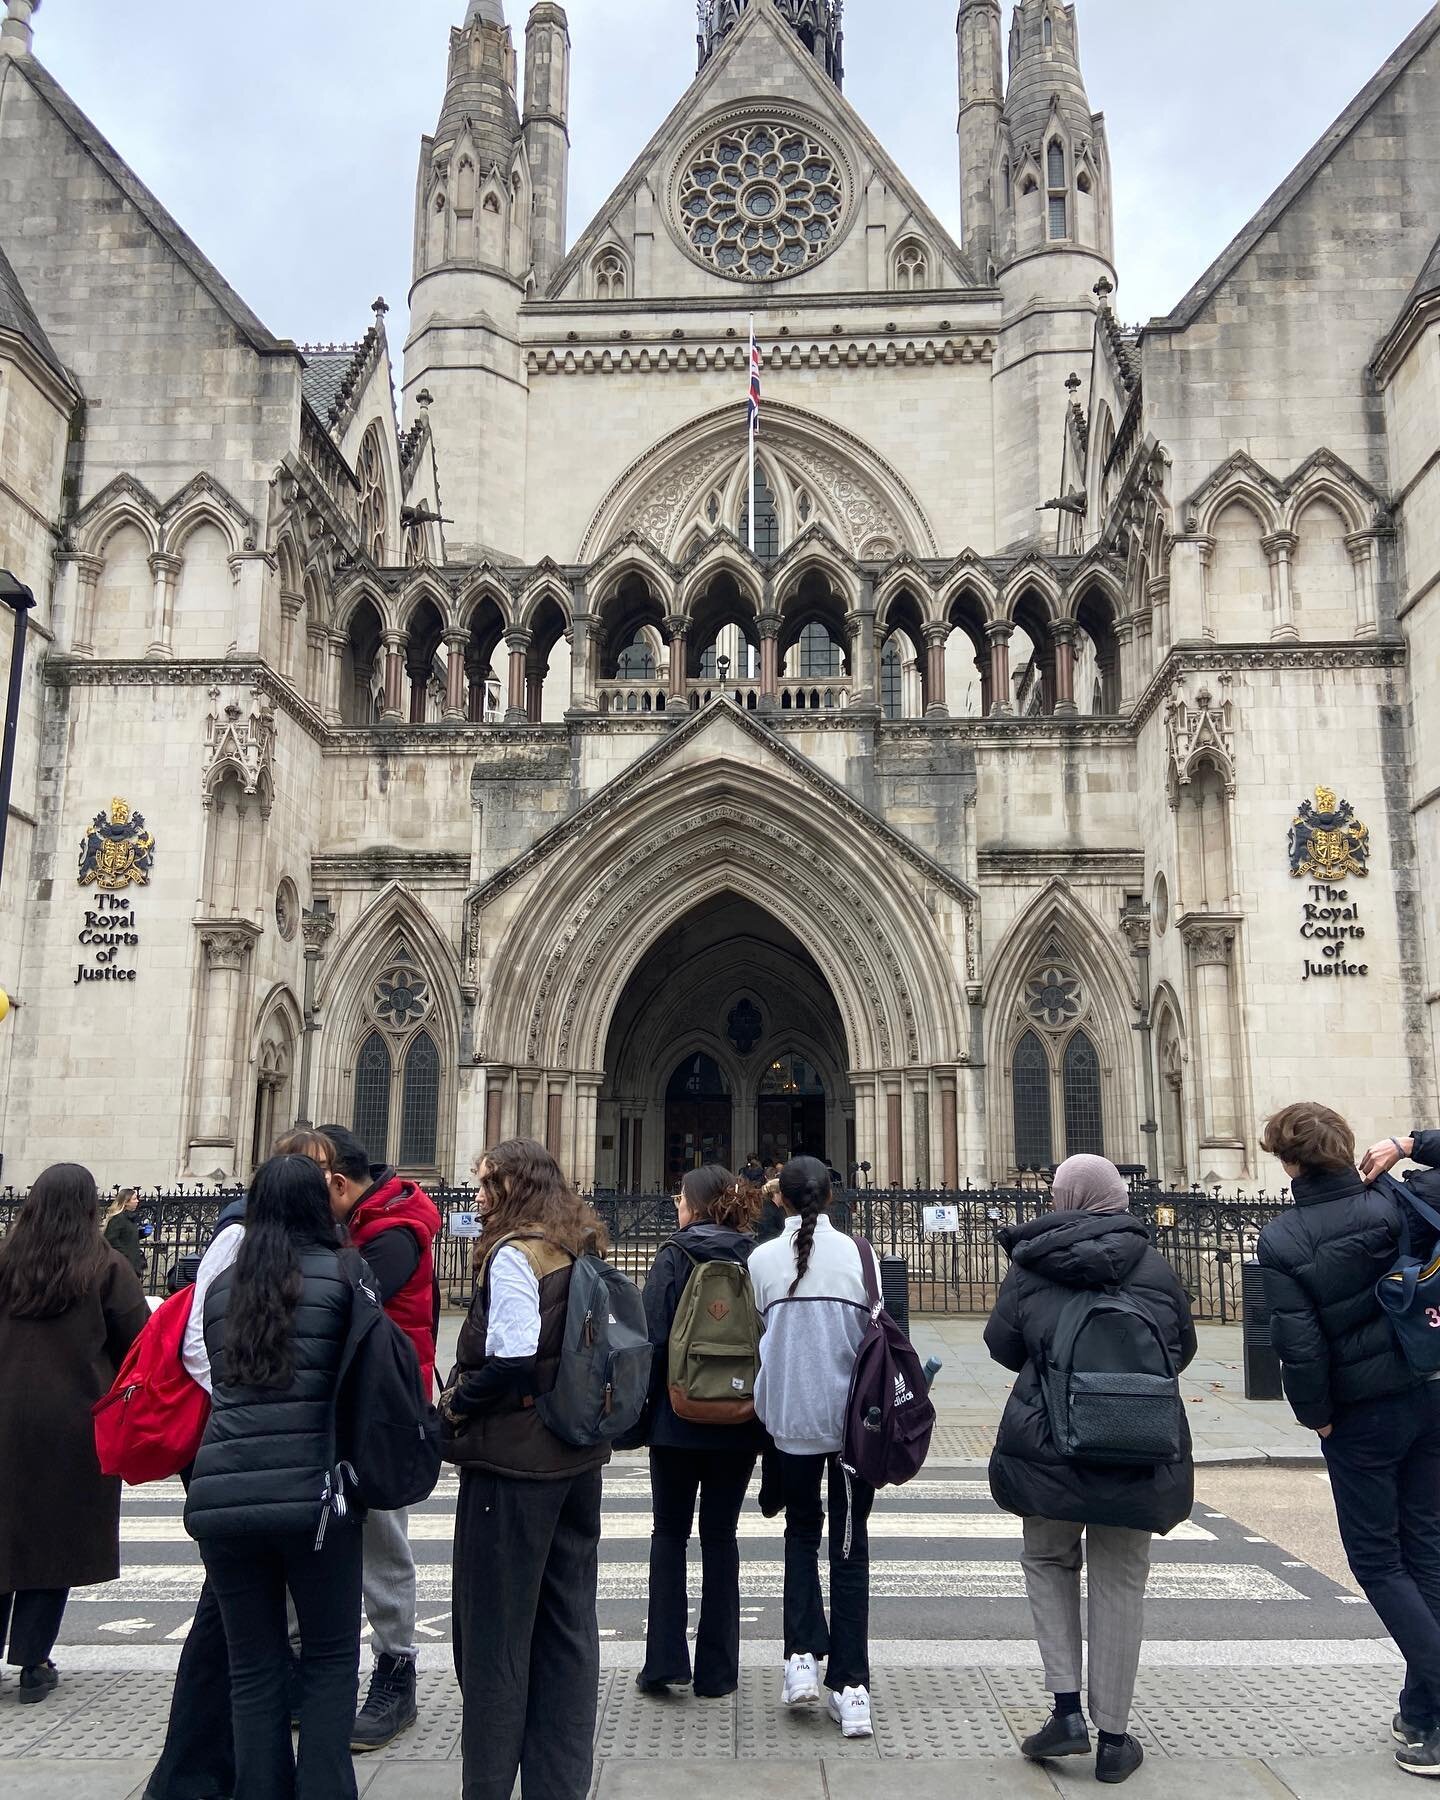 Heading to the Royal Courts of Justice for a very important murder trial&hellip; aka our Mock Trial! 
.
.
.
.
#careers #sixthform #mocktrial #justice #halfterm #halftermactivities #halftermfun